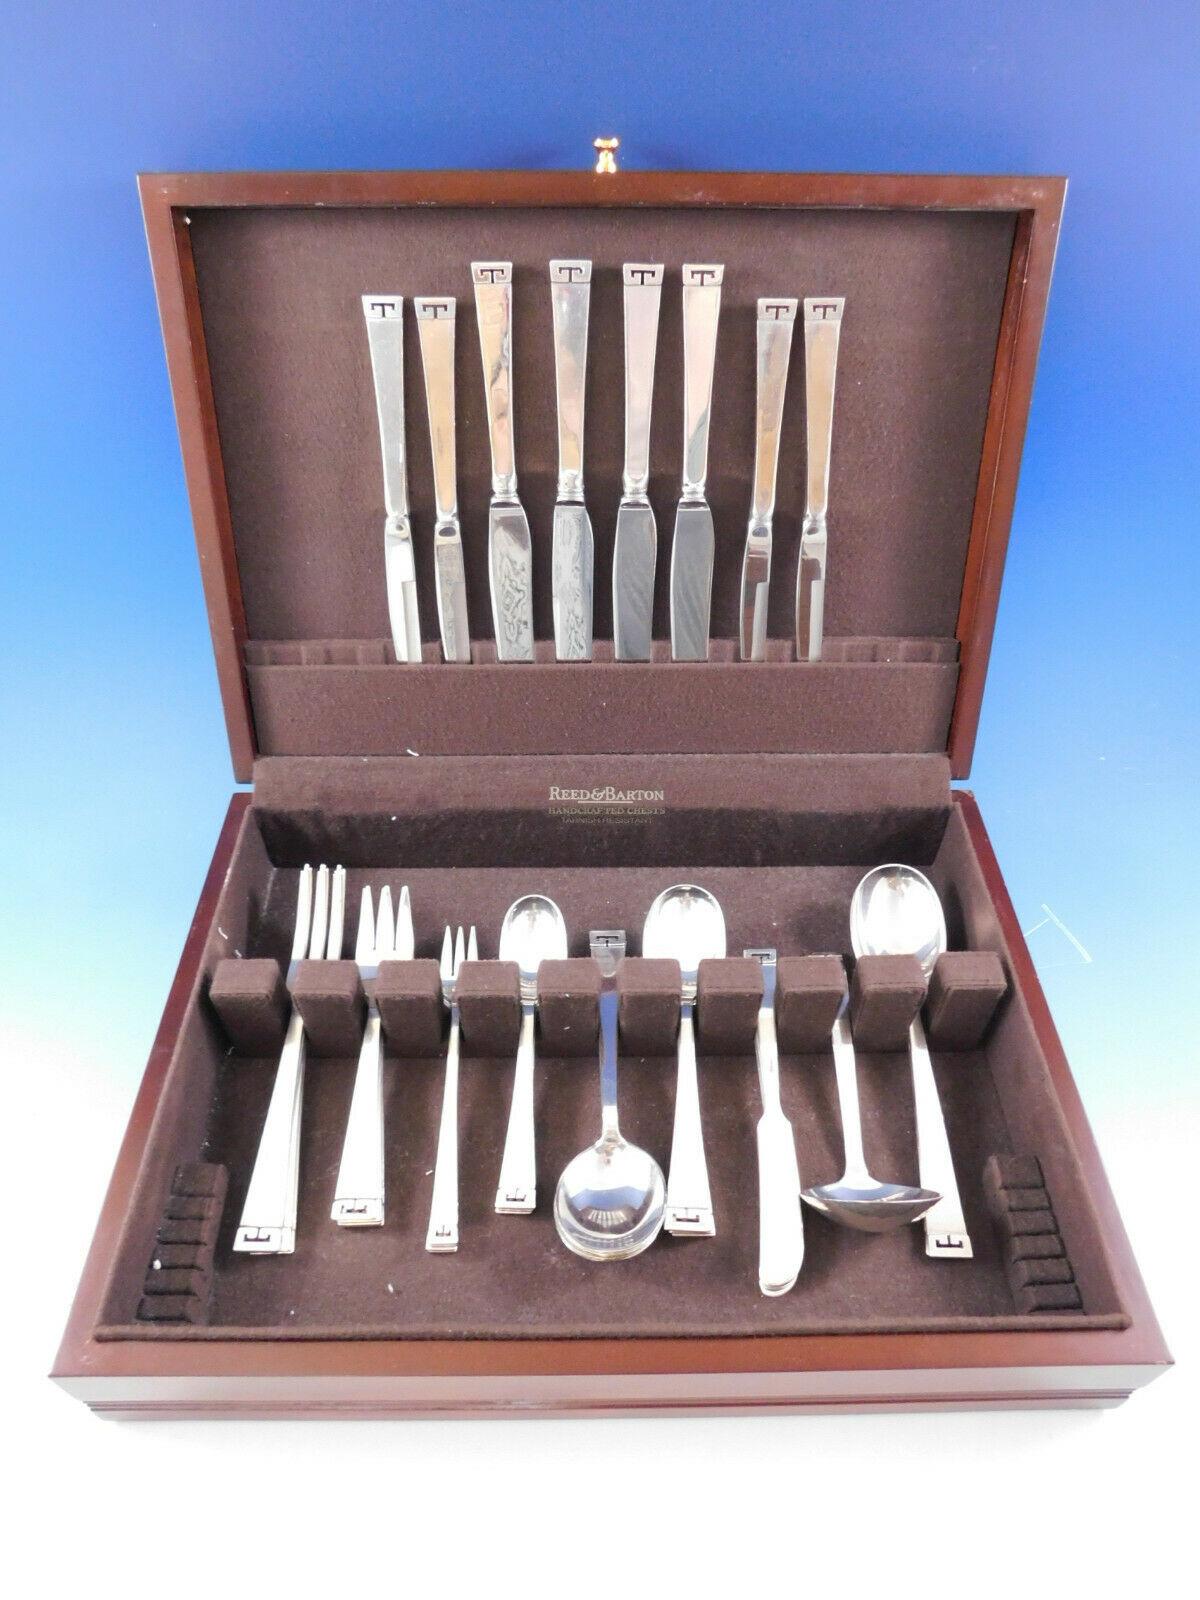 Dinner Size Chinese Key by Allan Adler sterling silver Flatware set - 39 pieces. This set includes:

4 Dinner Size Knives with innovative solid handles, 9 5/8